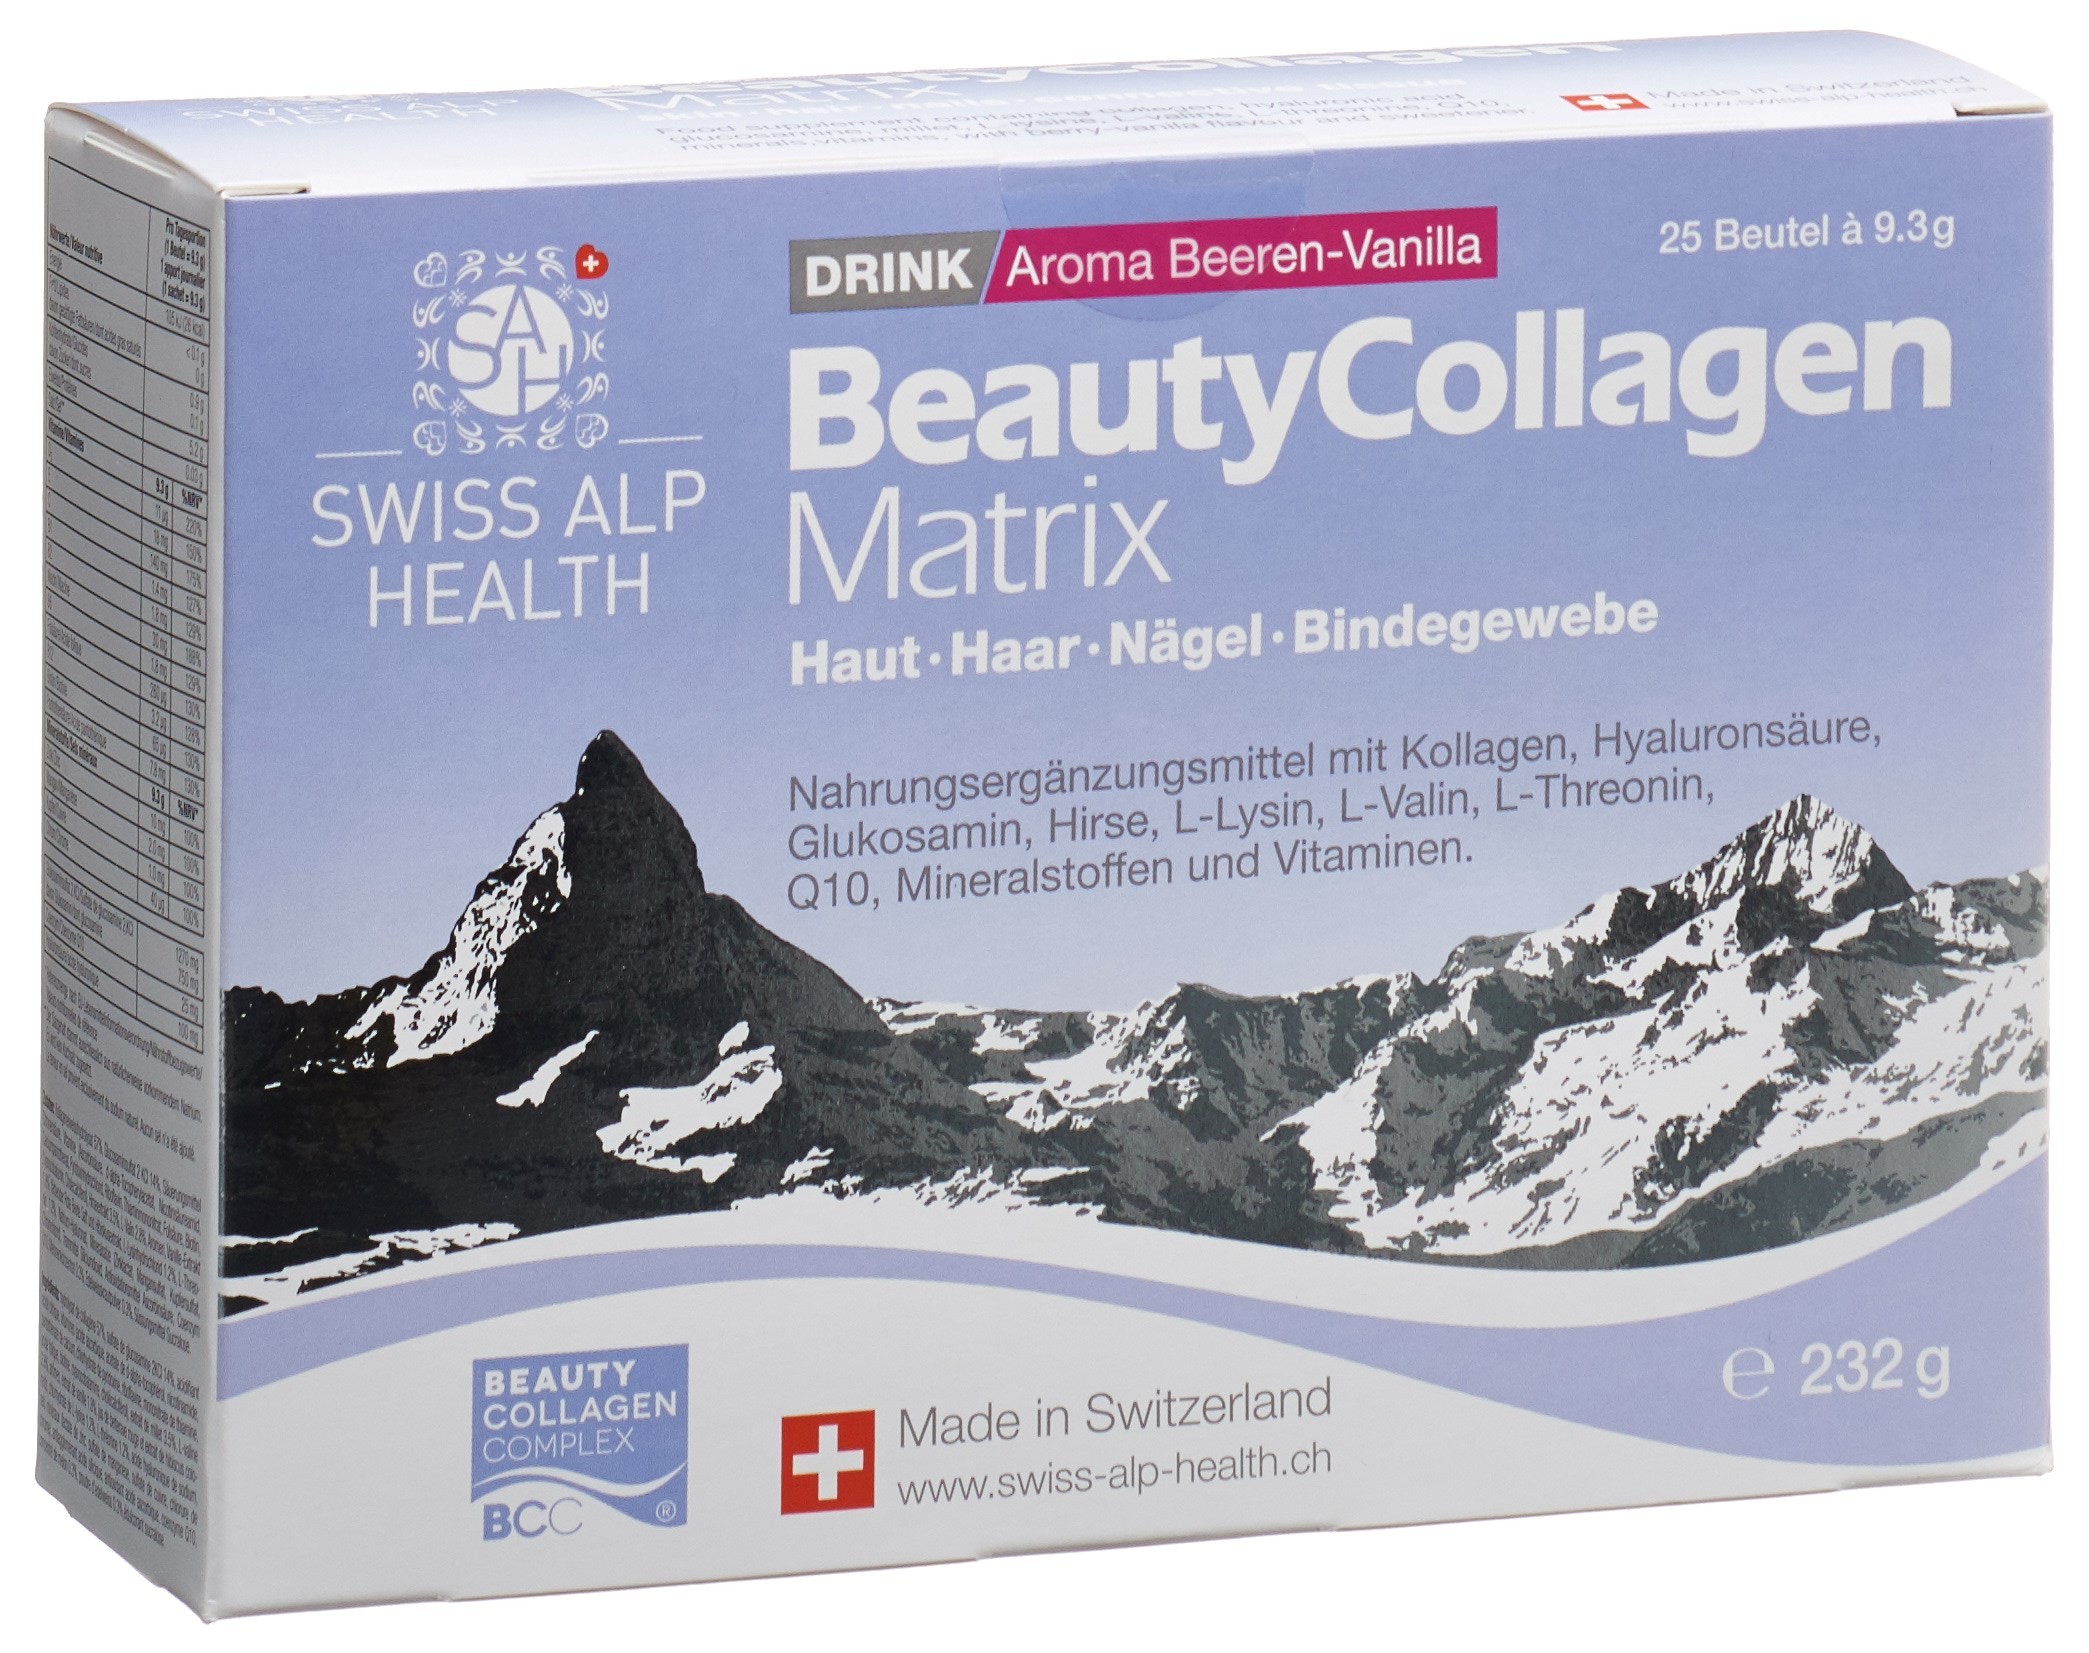 Beauty Collagen Matrix: clinically tested nutrition for elastic skin. Supports skin, hair, nails and connective tissue Study: 114 women aged 45-65 years took part in a double-blind, placebo-controlled study for 8 weeks. One group received daily standarized bioative collagen peptides (included in BeautyCollagenMatrix®) while the control group received a non-active powder (placebo). Already after 4 weeks, positive effects were observed on the dermal matrix. After 8 weeks the appearance of the skin and the skin matrix improved significantly: dermal procollagen type I increased by +65%, elastin by +18% (compared to placebo, figure 1*). But not only the skin matrix improved significantly but also the winkles around the eyes. For each woman 3-dimensional pictures were taken and measured by computers before and after the study. On average wrinkles around the eyes decreased by -20% (winkle volume, depth and width), with a maximum reduction of up to 49% (figure 2*). Figure 1| Procollagen and elastin synthesis compared to placebo